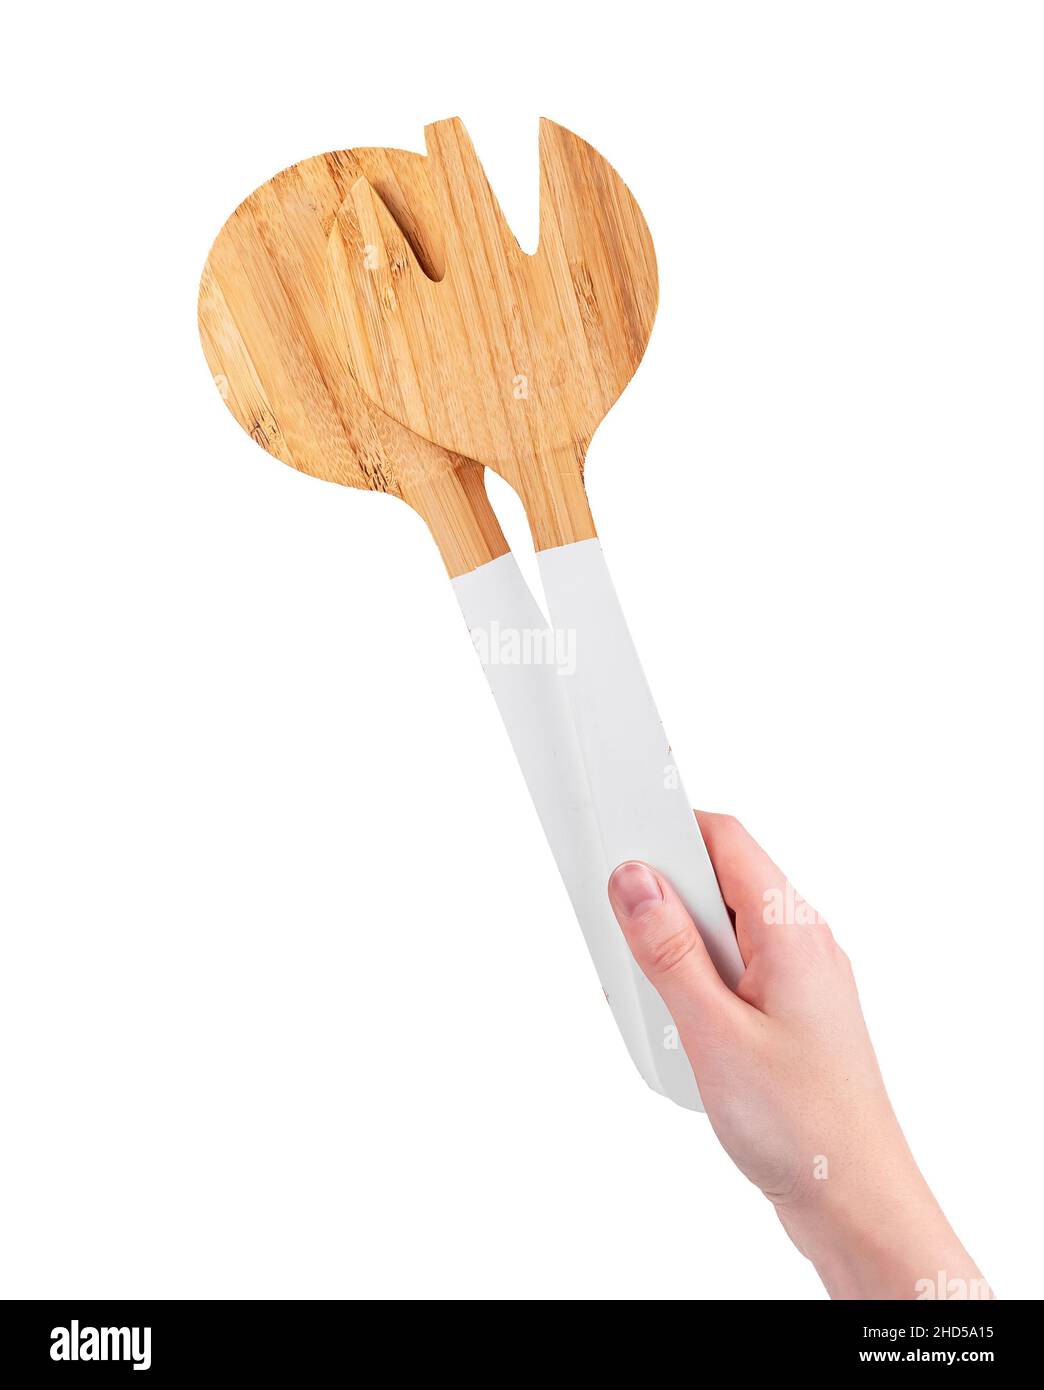 Kitchen utensil in hand isolated on white background. Stock Photo